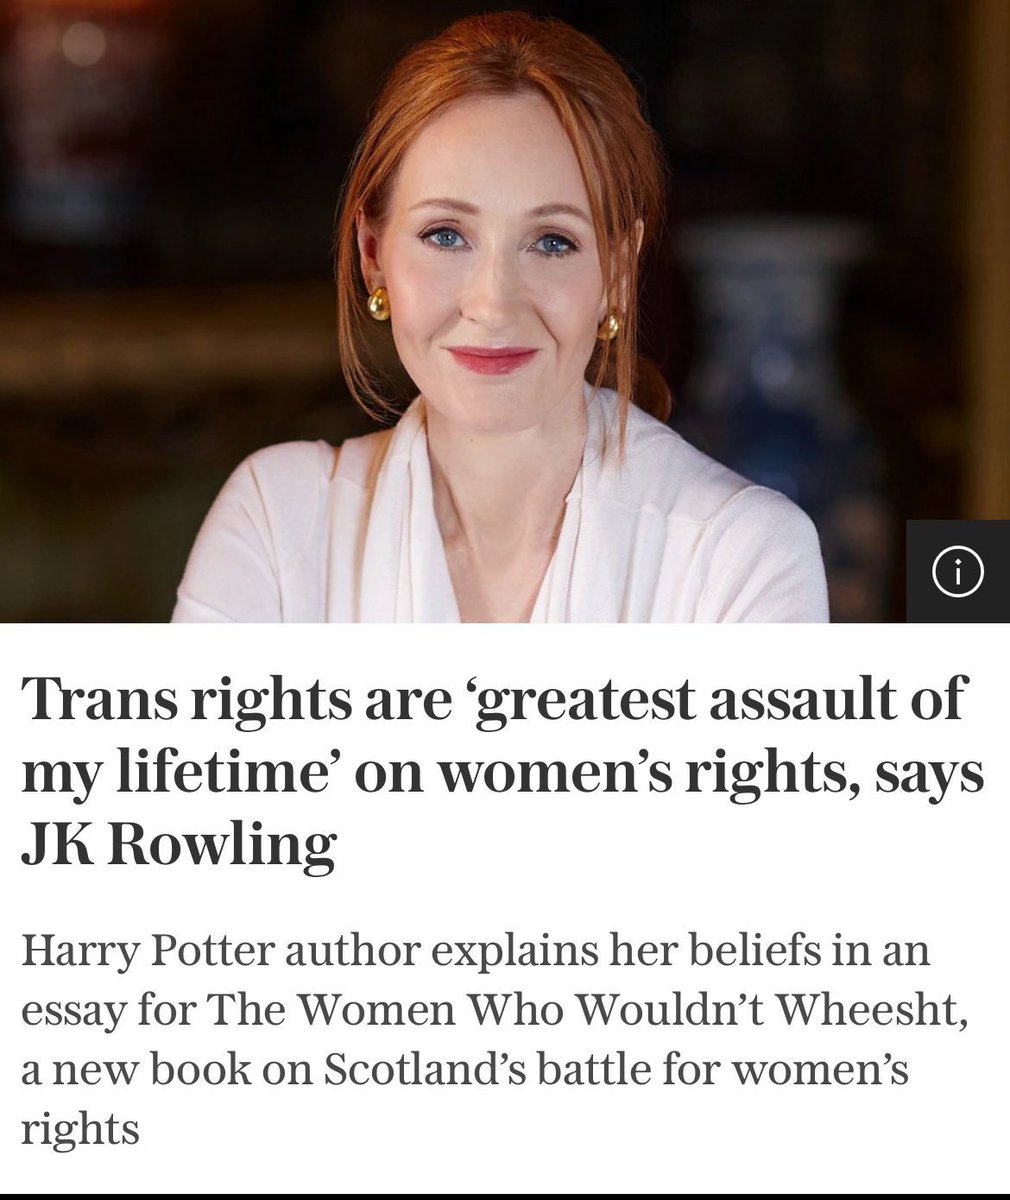 JK Rowling's grifting is especially obvious here, because if she cared about feminist issues, like I do as a trans woman, she’d know and care more about:
Plummeting Rape Convictions
Unequal Pay
Bodily Autonomy
Workplace Discrimination
Insufficient Childcare Provisions
and more..